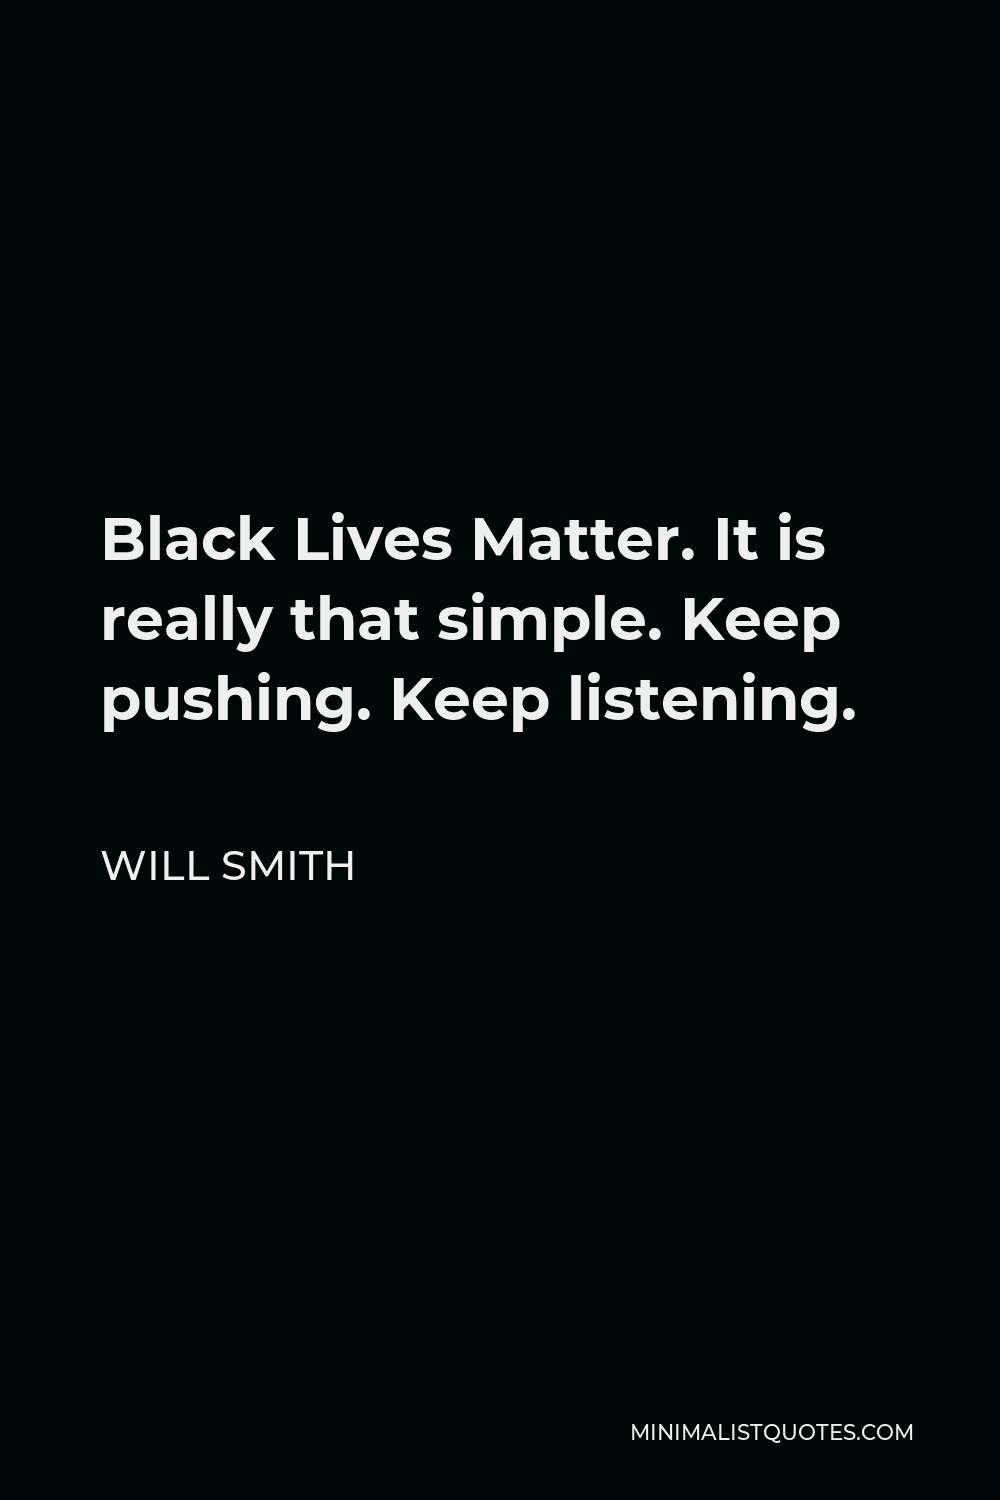 Will Smith Quote - Black Lives Matter. It is really that simple. Keep pushing. Keep listening.